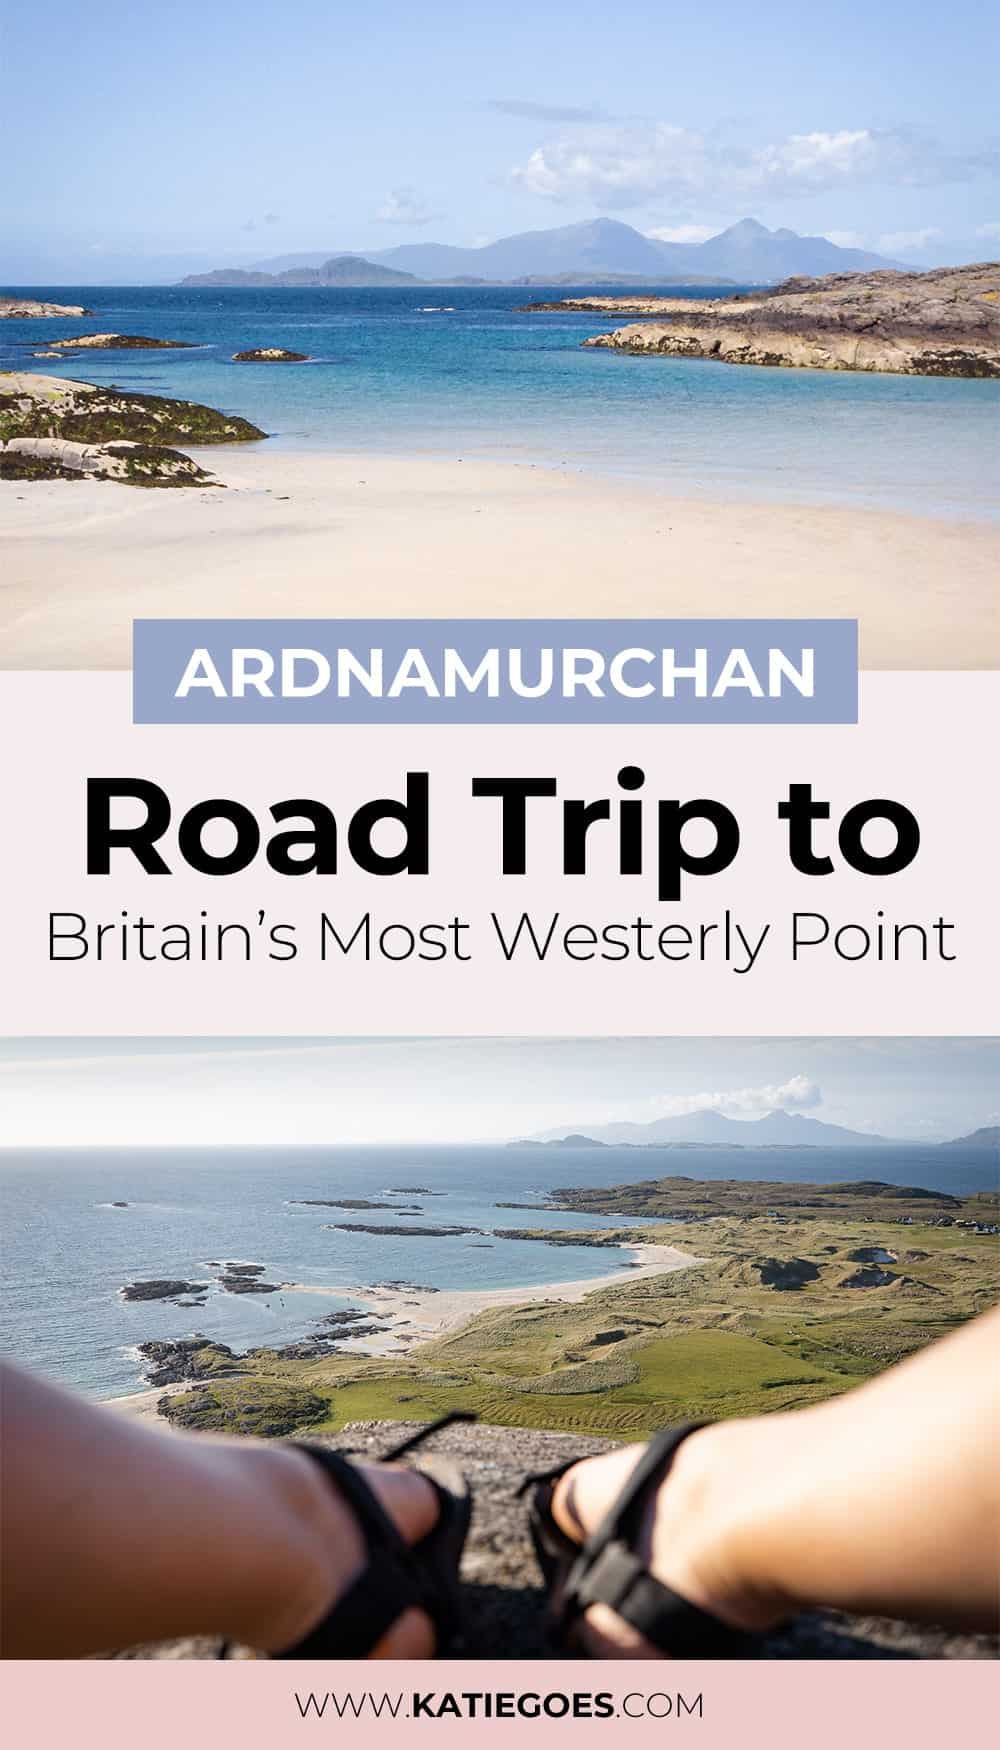 Is Ardnamurchan worth visiting? Road trip to Britain's Most Westerly Point